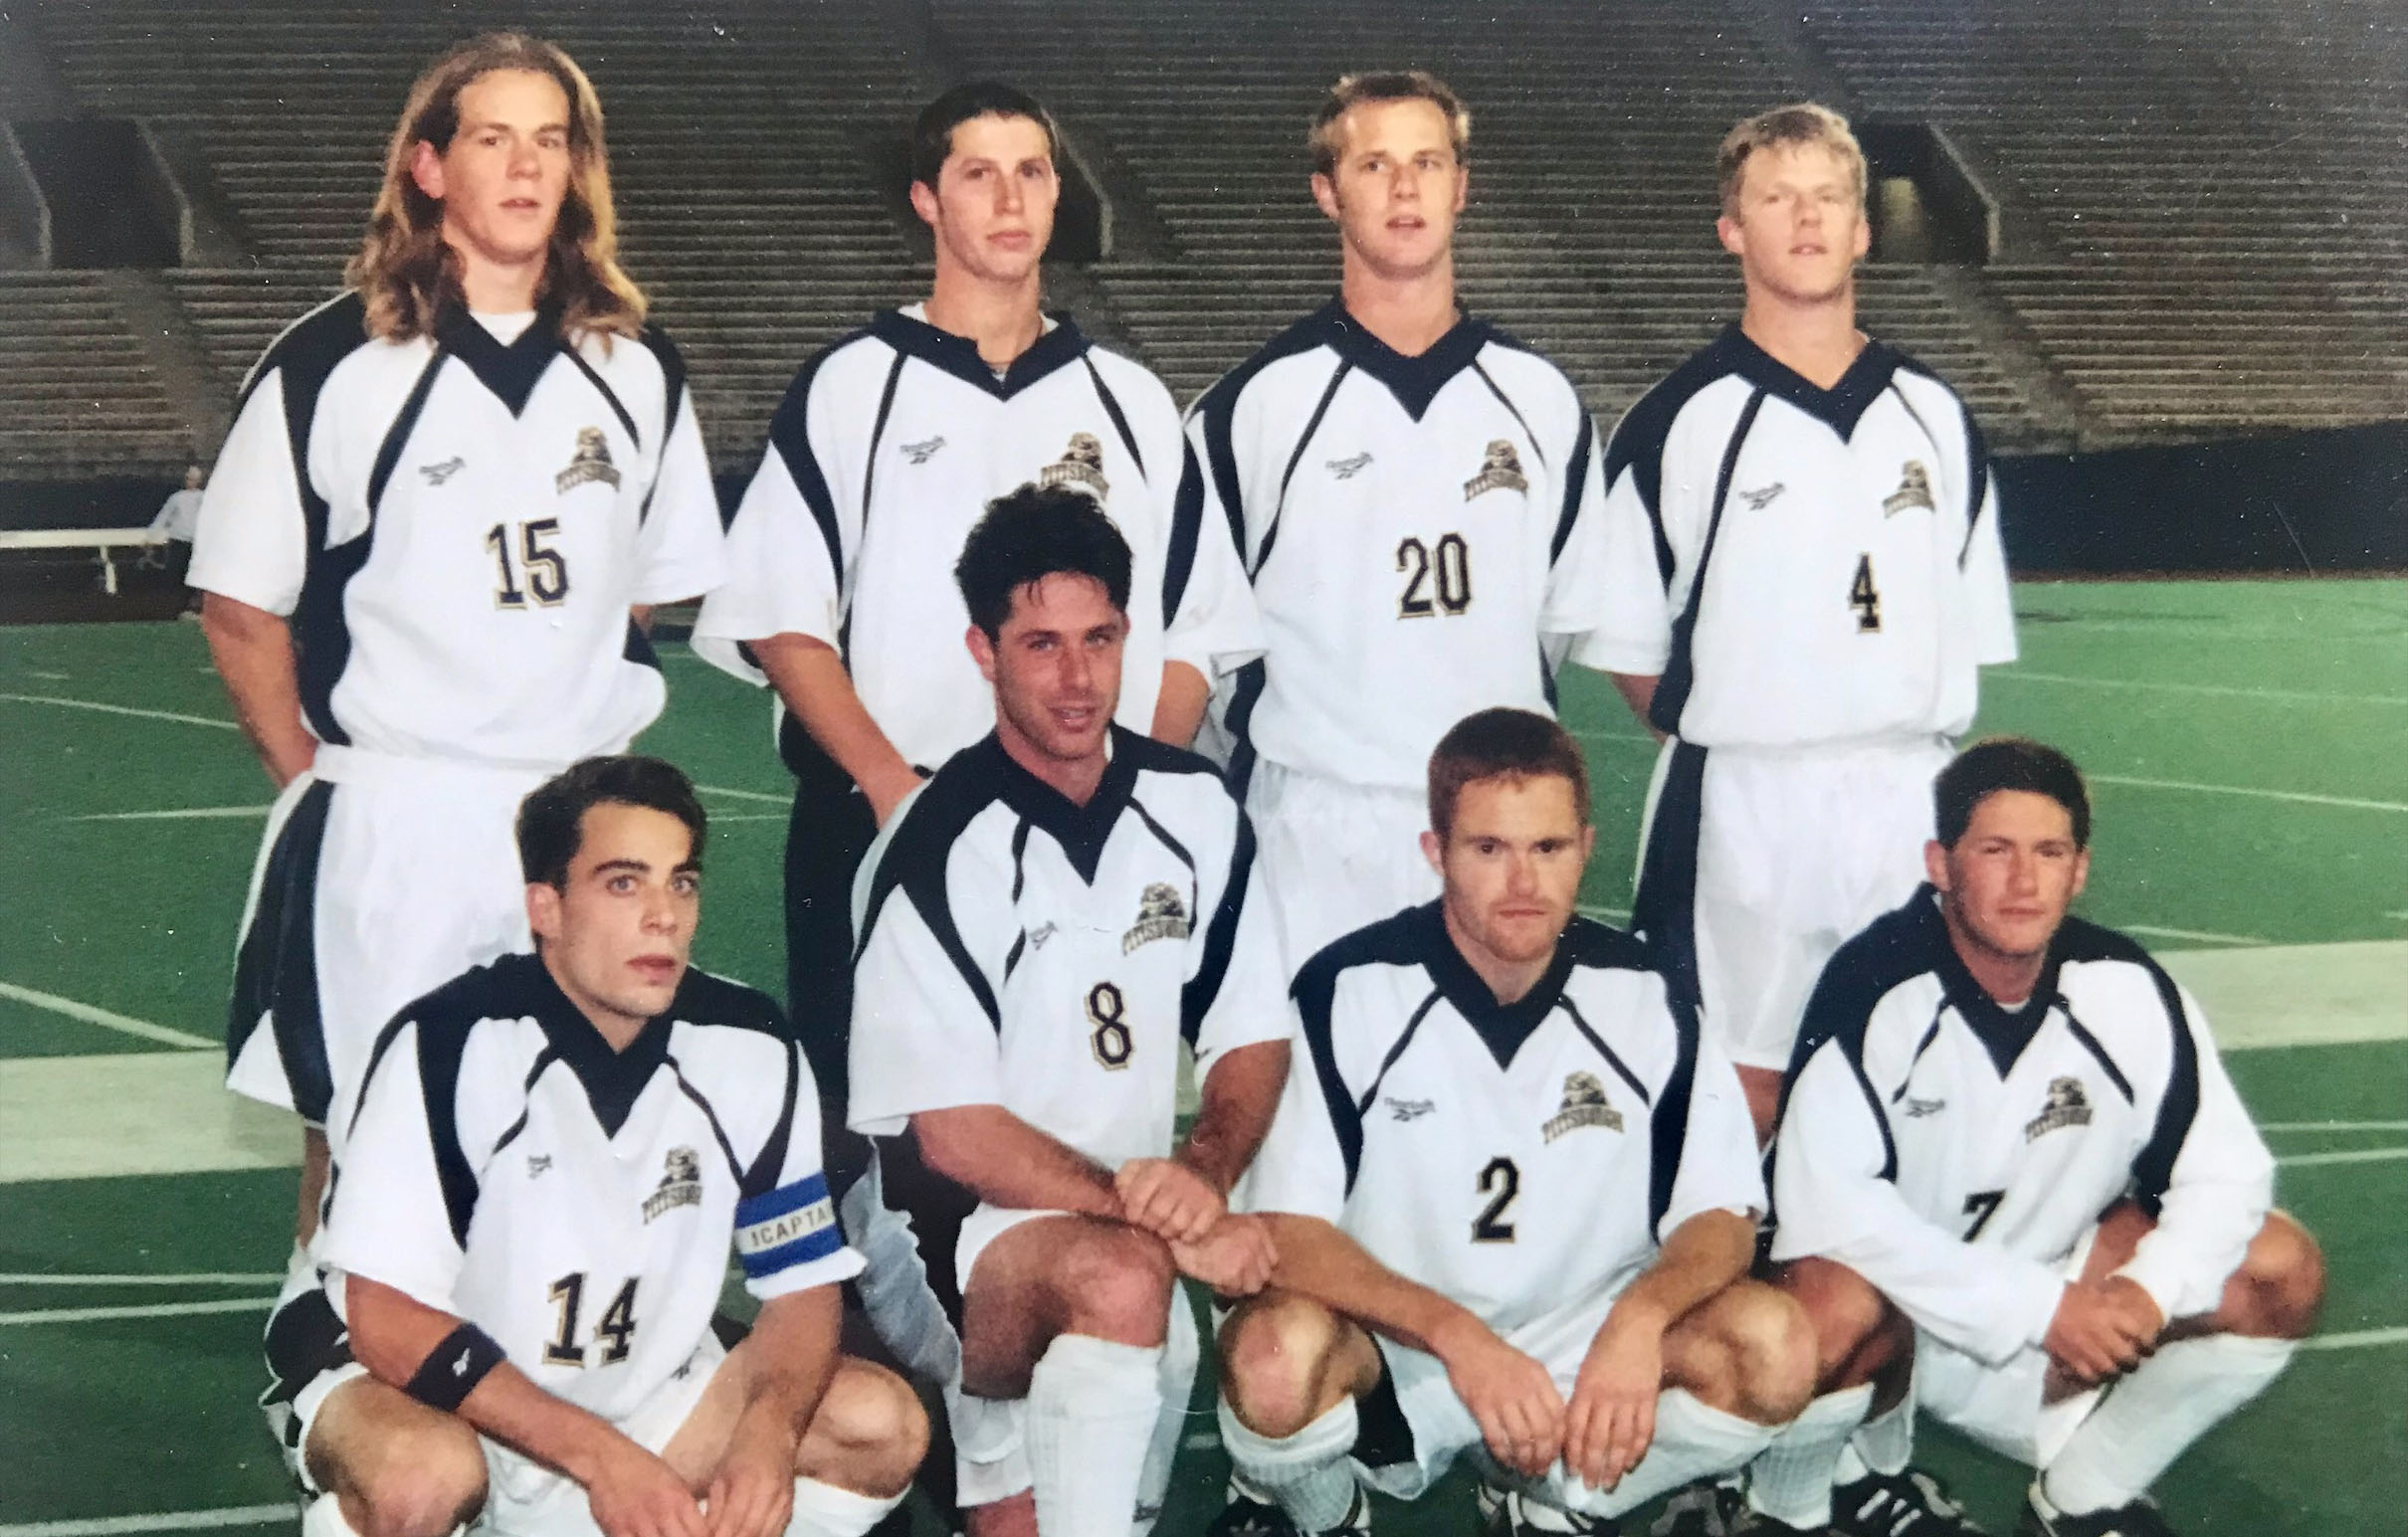 Charles Kotuby (first row, second from right) on the Pitt varsity soccer team in the 1990s